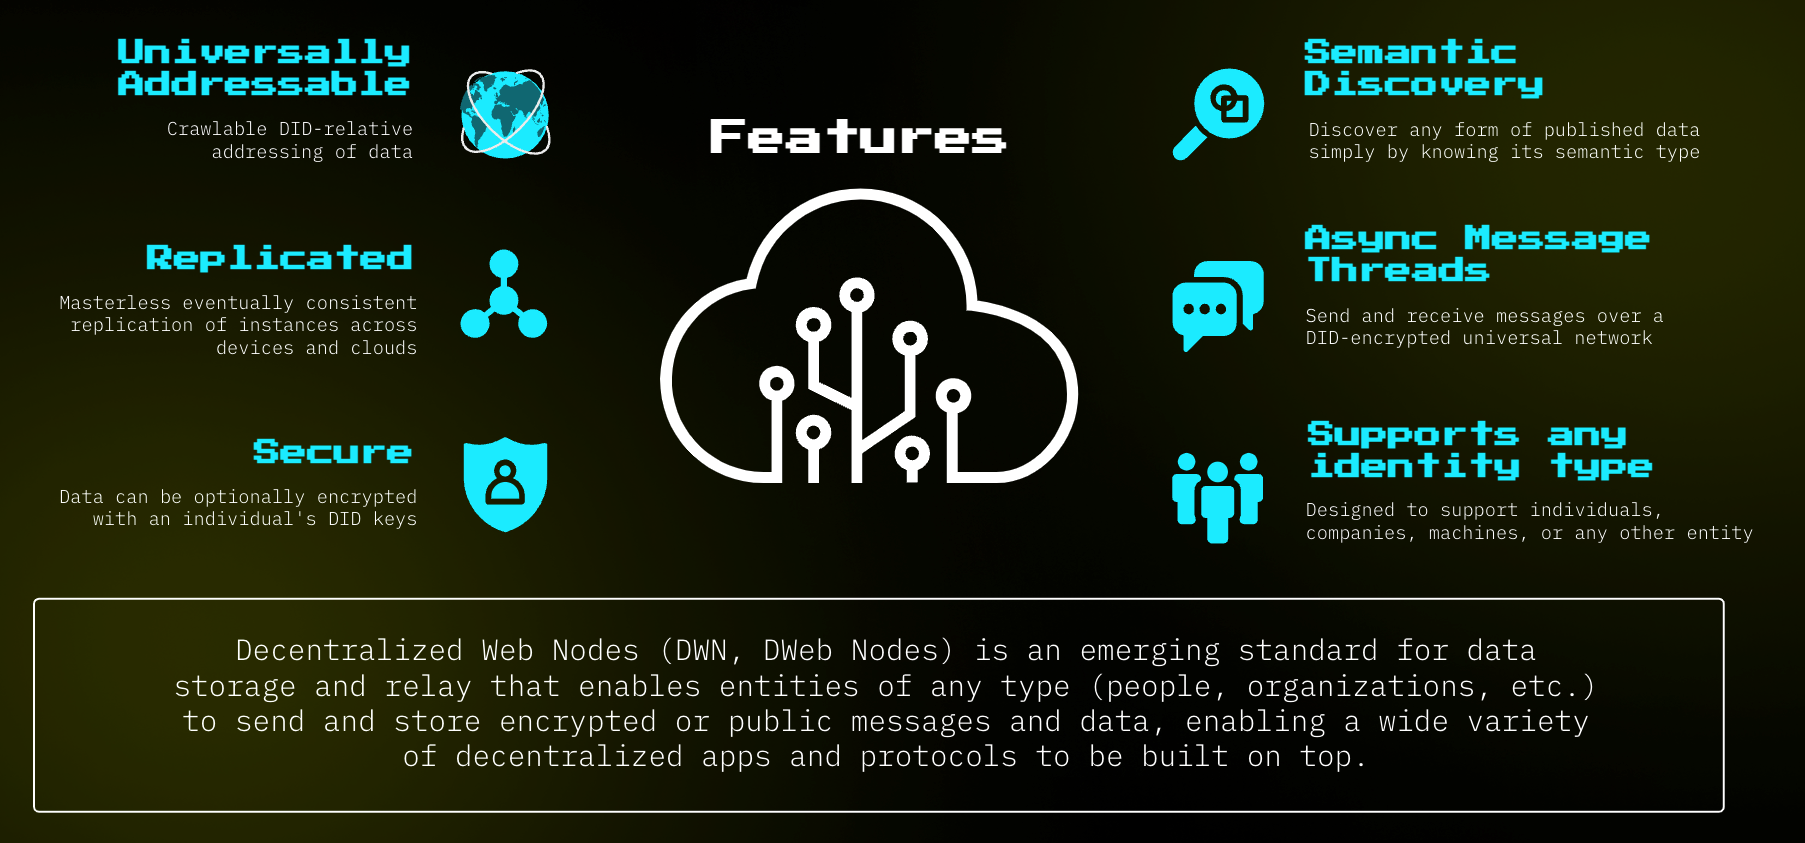 Decentralized Web Nodes is an emerging standard for data storage and relay that enables entities of any type (people, organizations, etc) to send and store encrypted or public messages and data, enabling a wide variety of decentralized apps and protocols to be built on top. Features of Decentralized Web Nodes include: universally addressable, replicated, secure, semantic discovery, async message threads, supports any identity type.